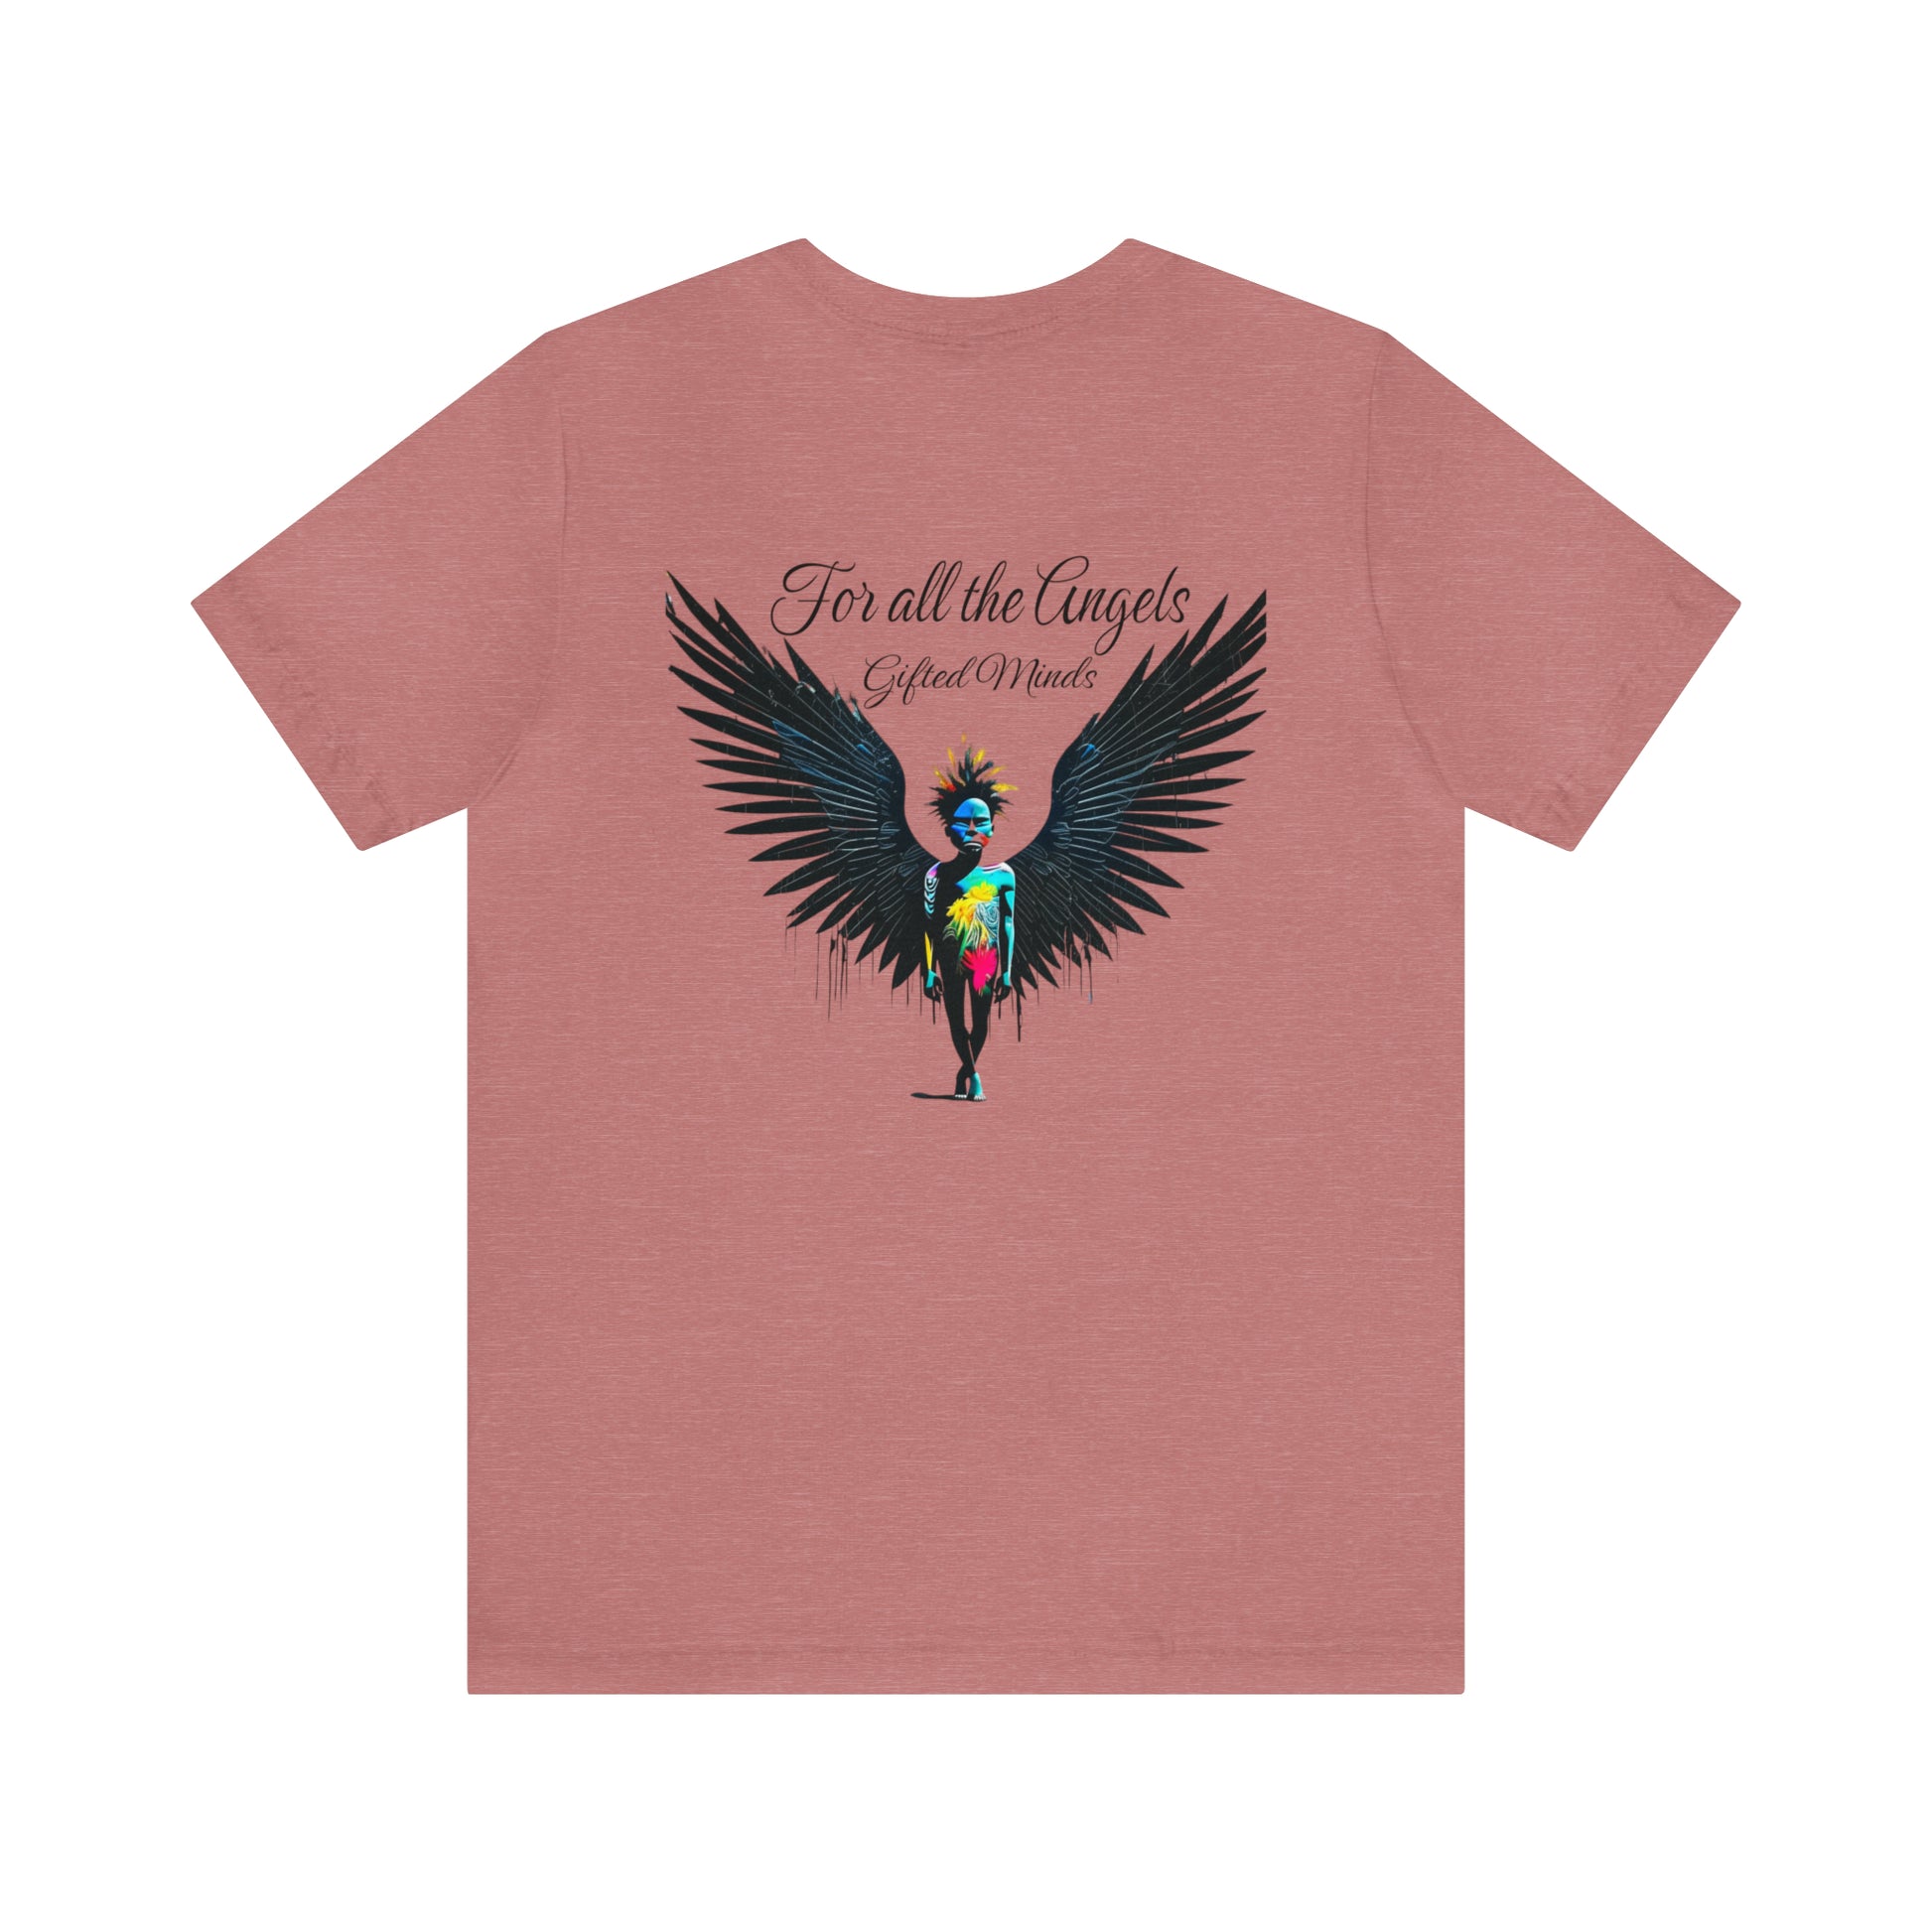 For all the Angels Short Sleeve Tee - GFTD MNDS